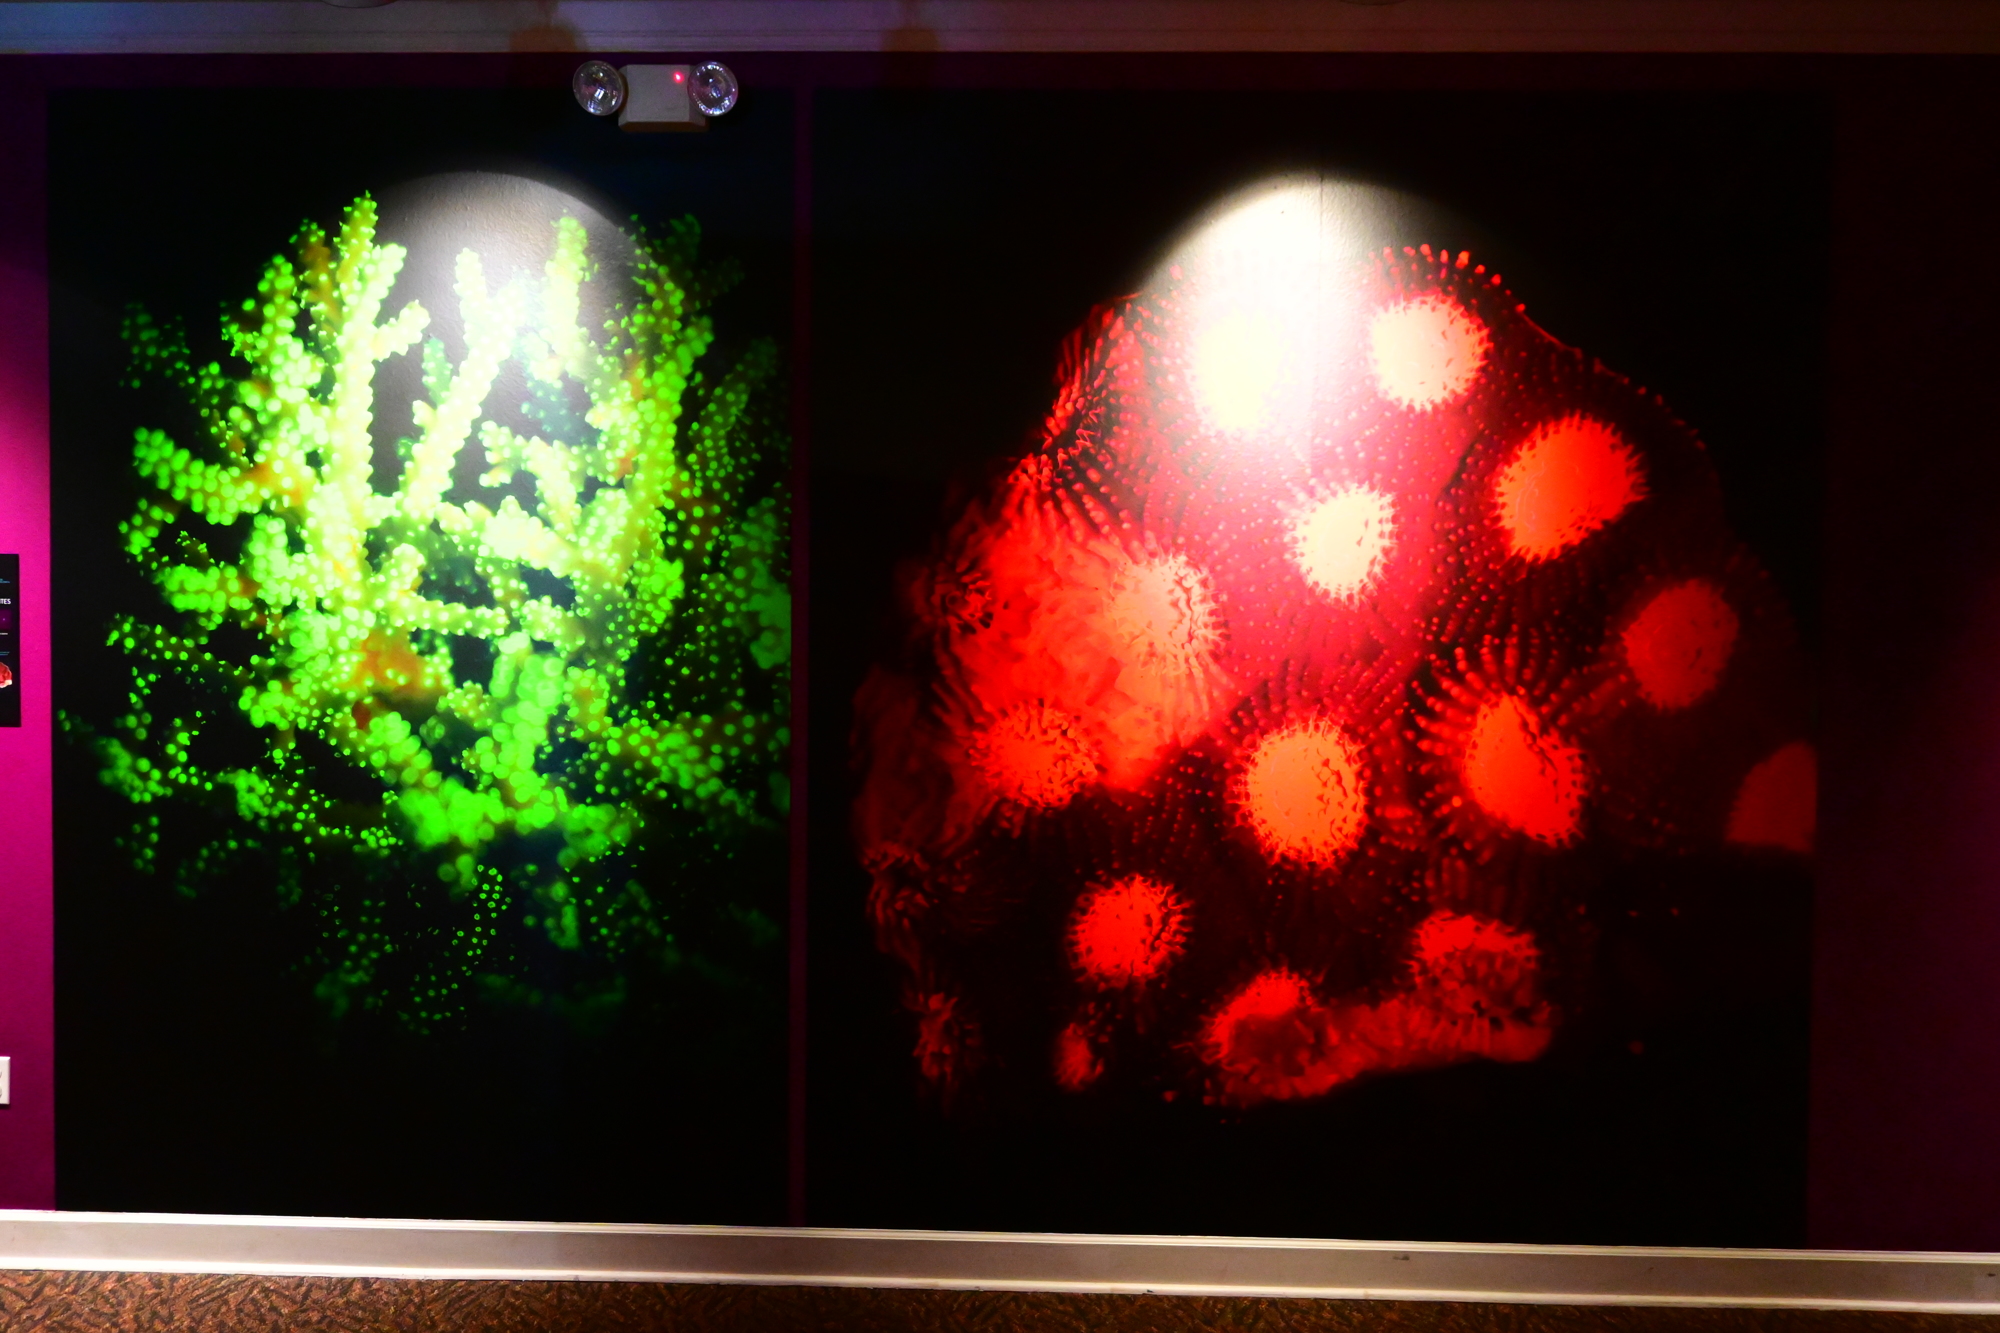 This study of corals is one of many displays demonstrating how science has been impacted by technology and study of light. (Photo: Spencer Fordin)